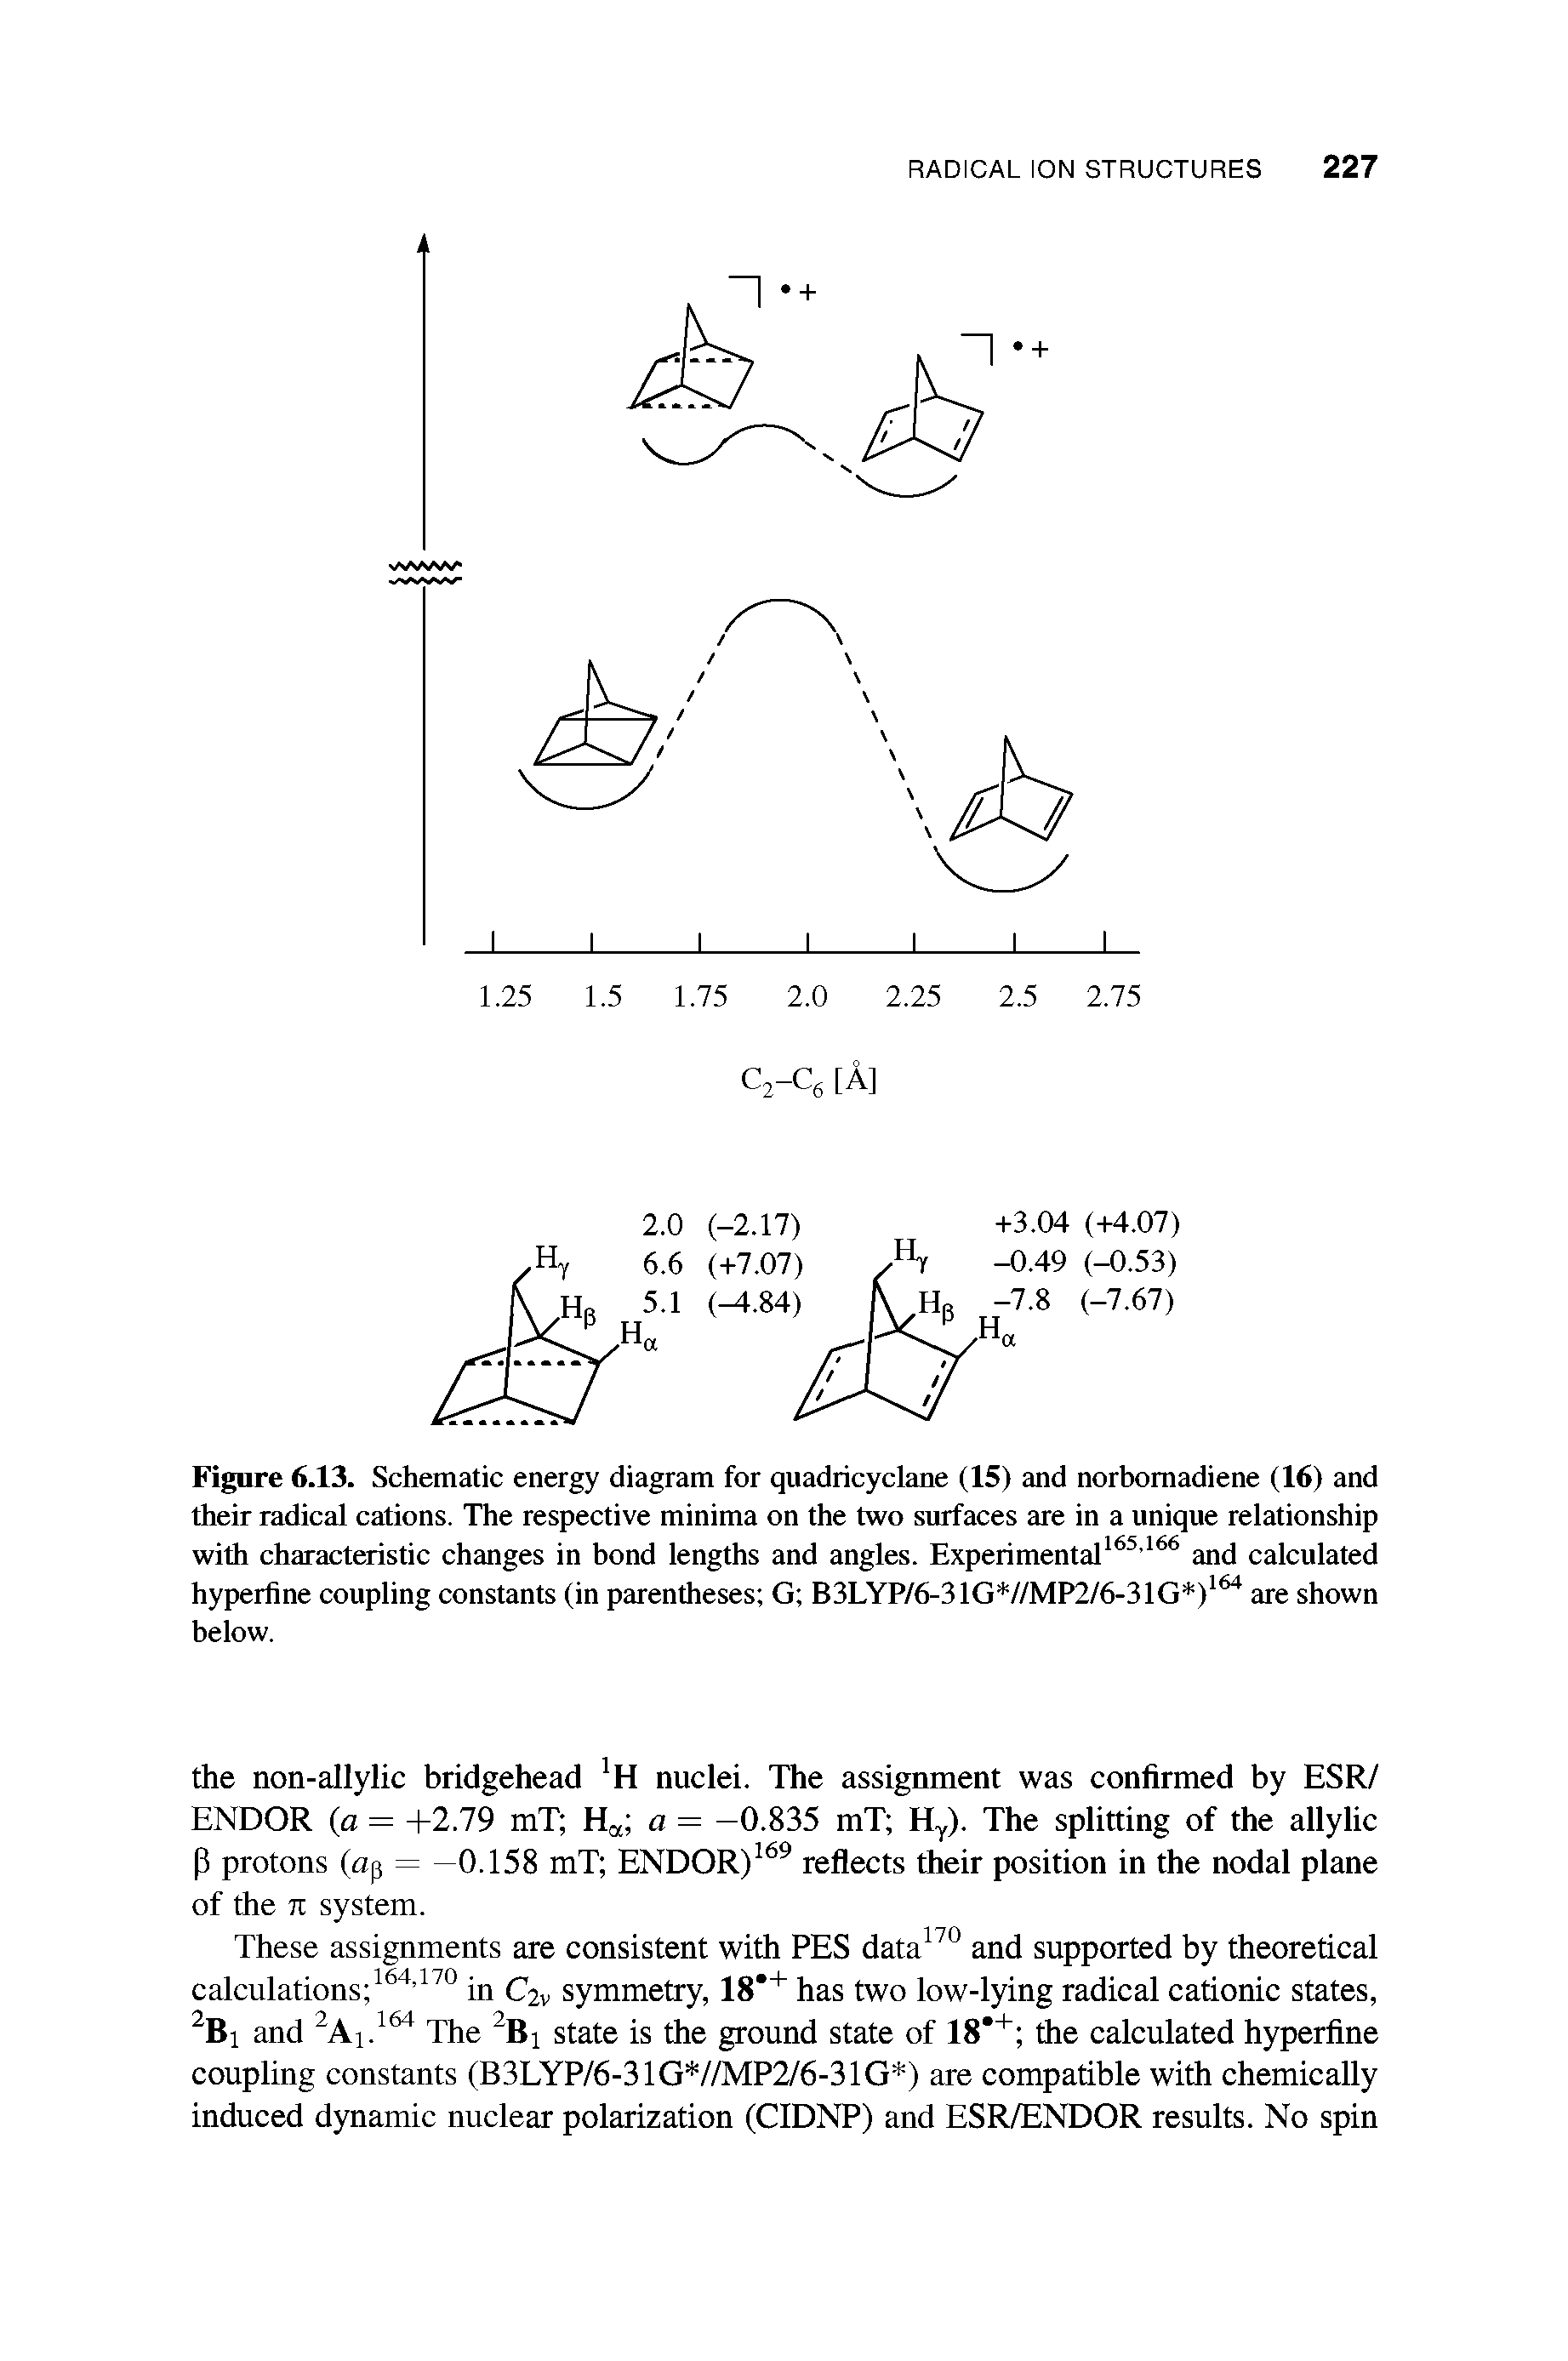 Figure 6.13. Schematic energy diagram for quadricyclane (15) and norbomadiene (16) and their radical cations. The respective minima on the two surfaces are in a unique relationship with characteristic changes in bond lengths and angles. Experimental and calculated hyperfine coupling constants (in parentheses G B3LYP/6-31G //MP2/6-31G ) are shown below.